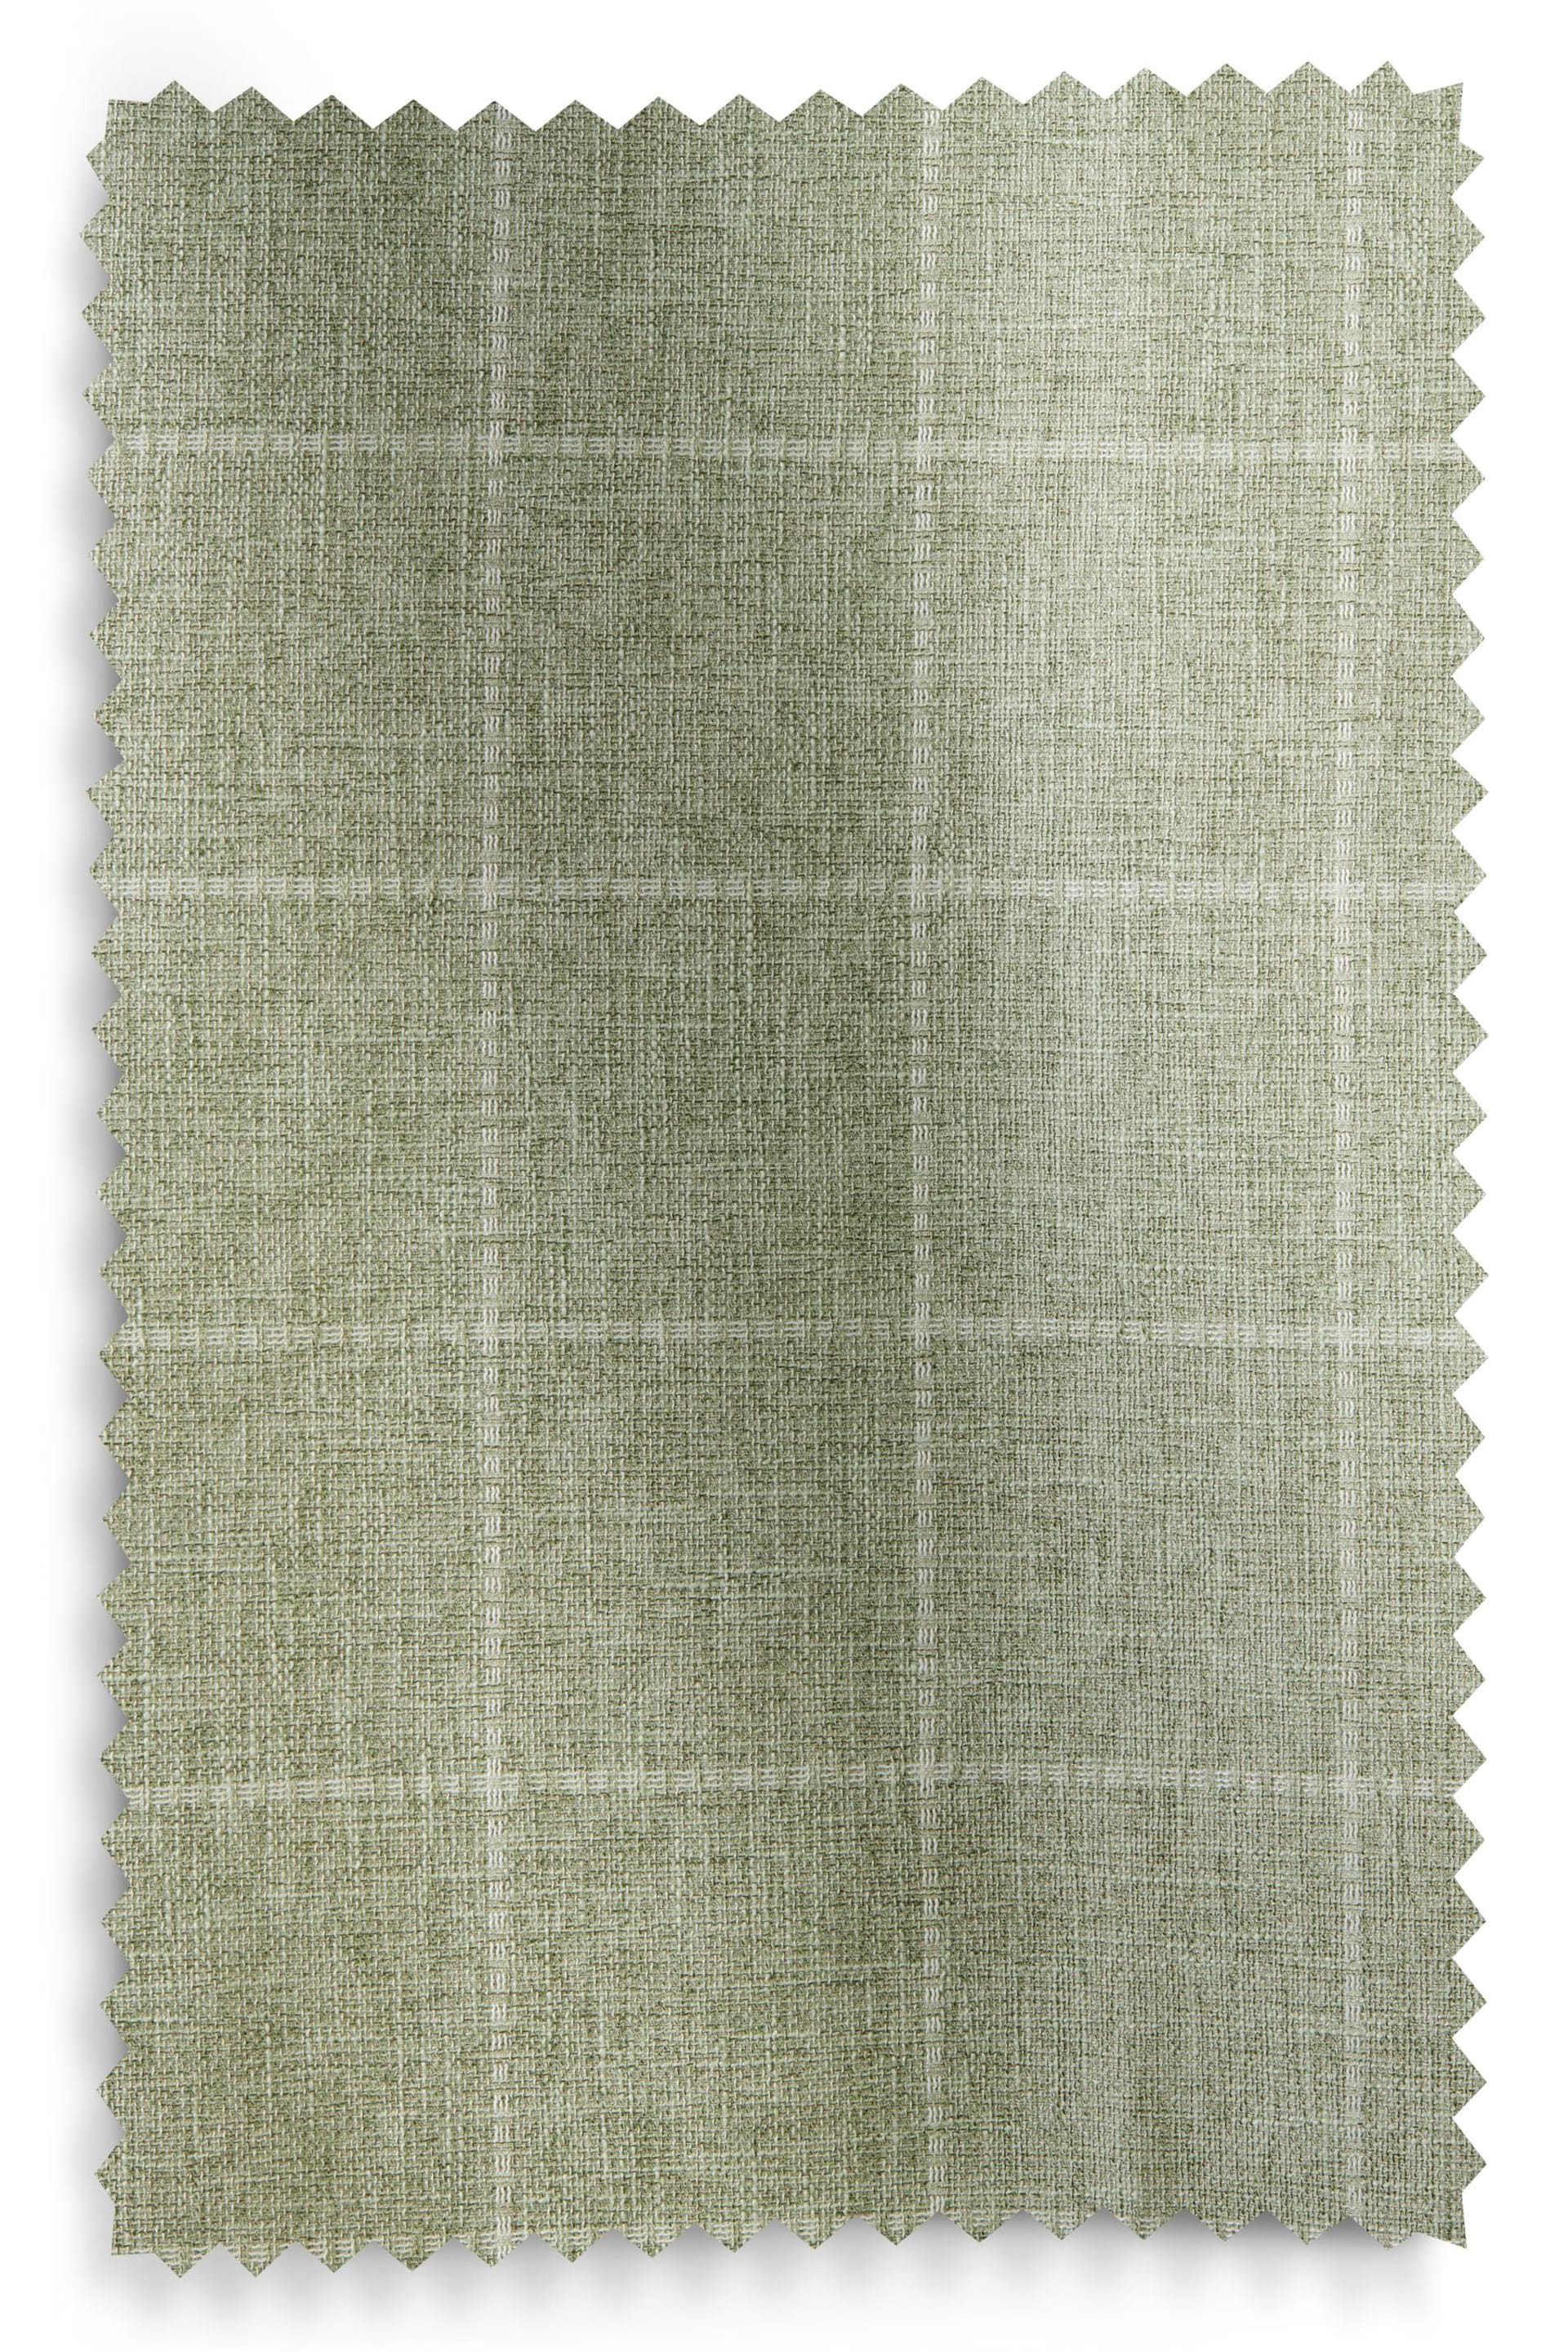 Sage Green Windowpane Check Lined Eyelet Curtains - Image 5 of 5